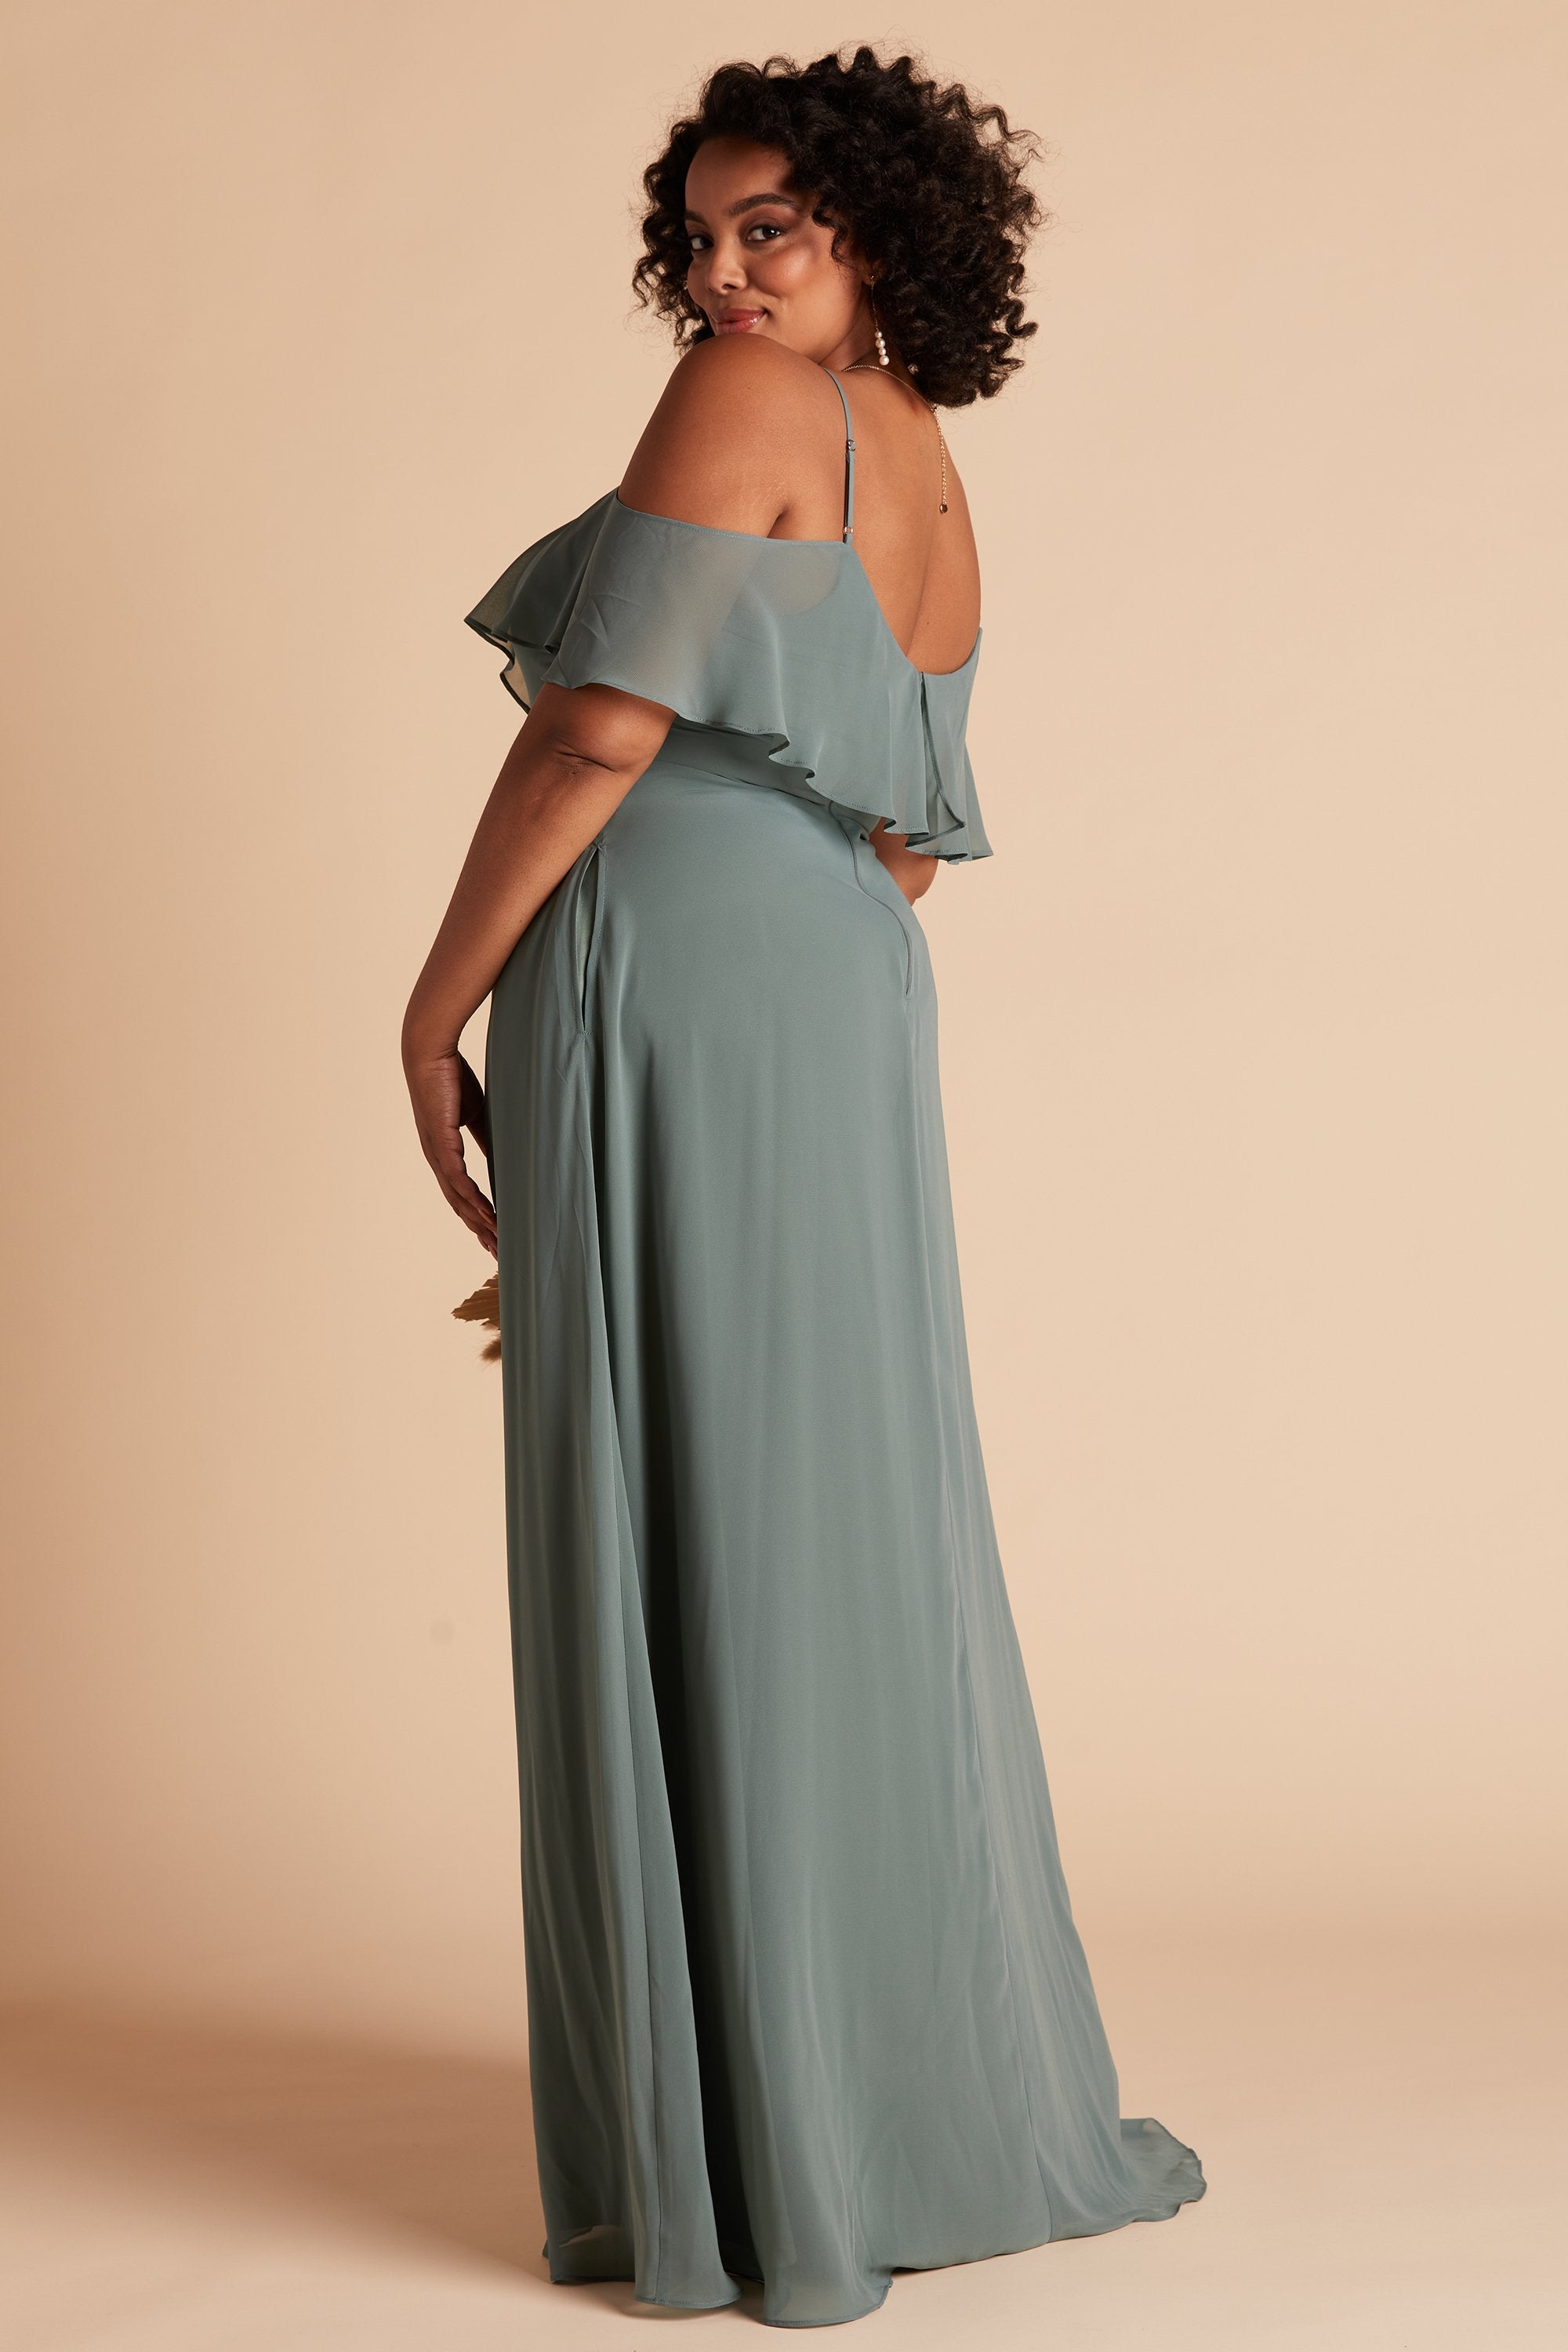 Jane convertible plus size bridesmaid dress in sea glass green chiffon by Birdy Grey, side view